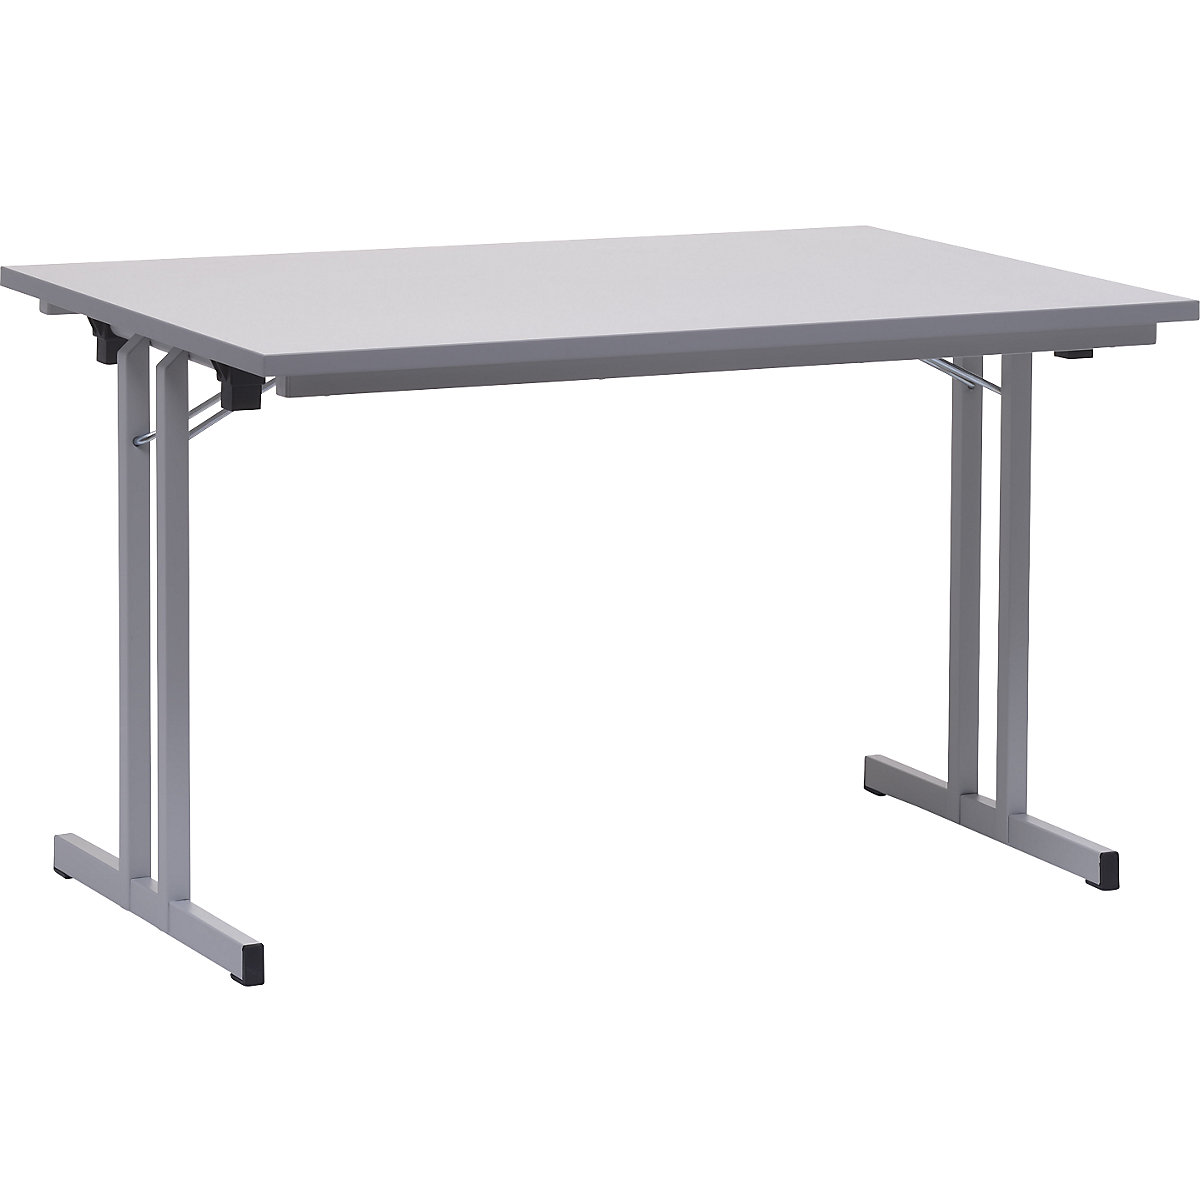 Folding table, with extra thick tabletop, height 720 mm, 1200 x 800 mm, light grey frame, light grey tabletop-5